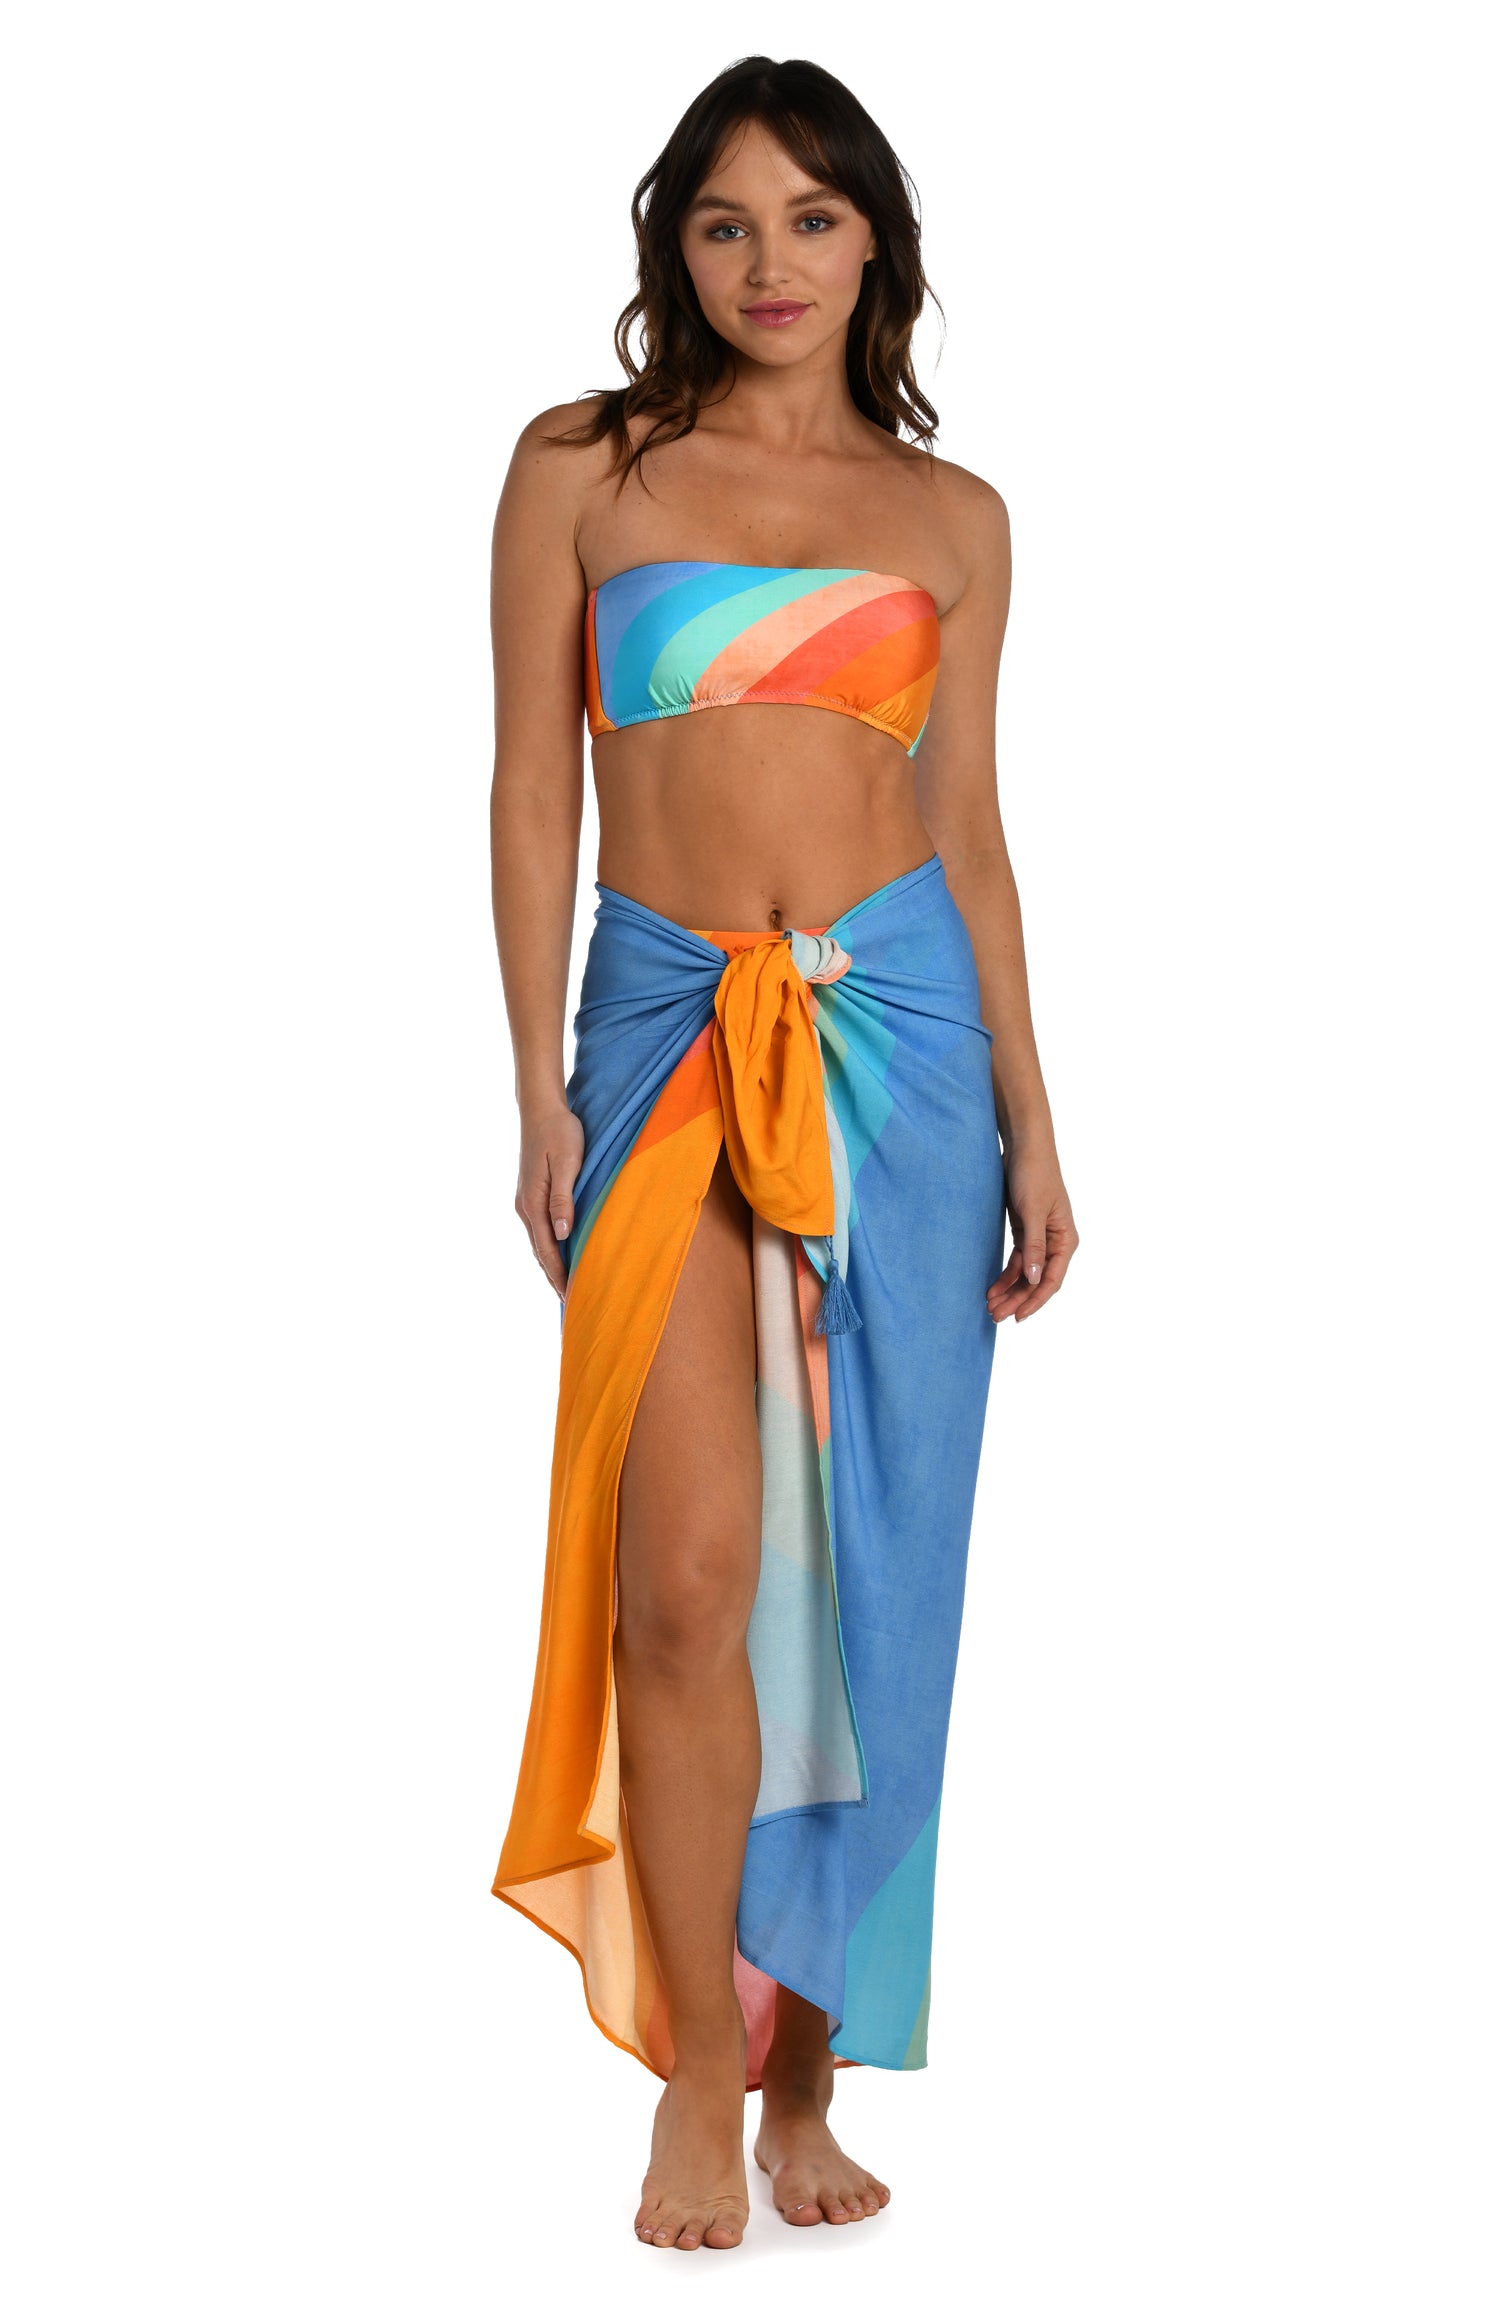 Model is wearing an orange and blue multicolored retro printed pareo wrap cover up from our Mod Block collection.